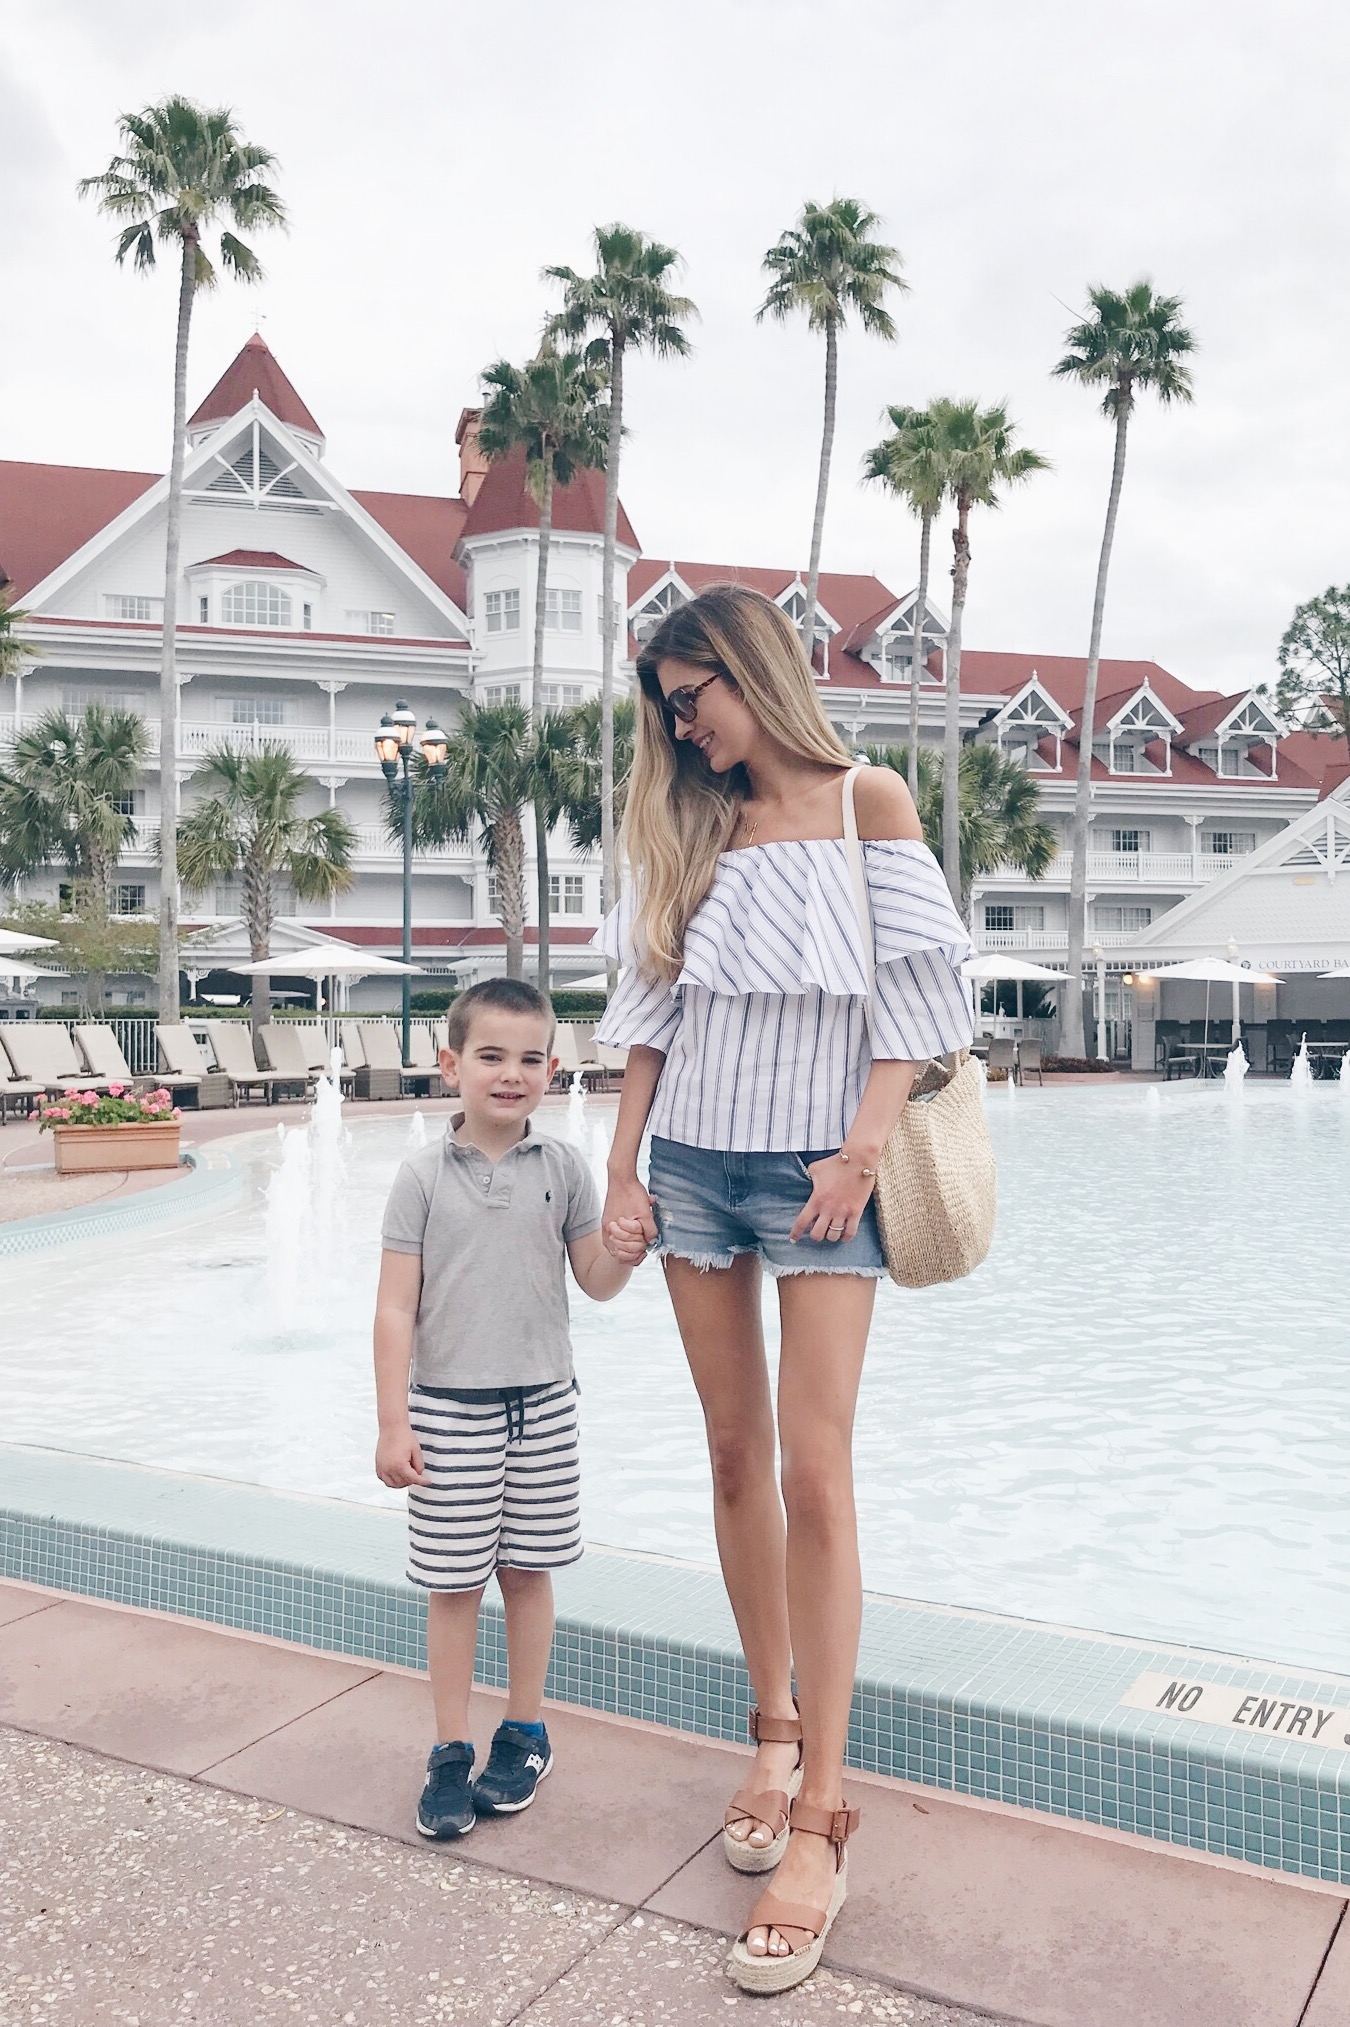 tips to save on a Disney world vacation - enjoy what the hotels have to offer on pinteresting plans connecticut lifestyle blog